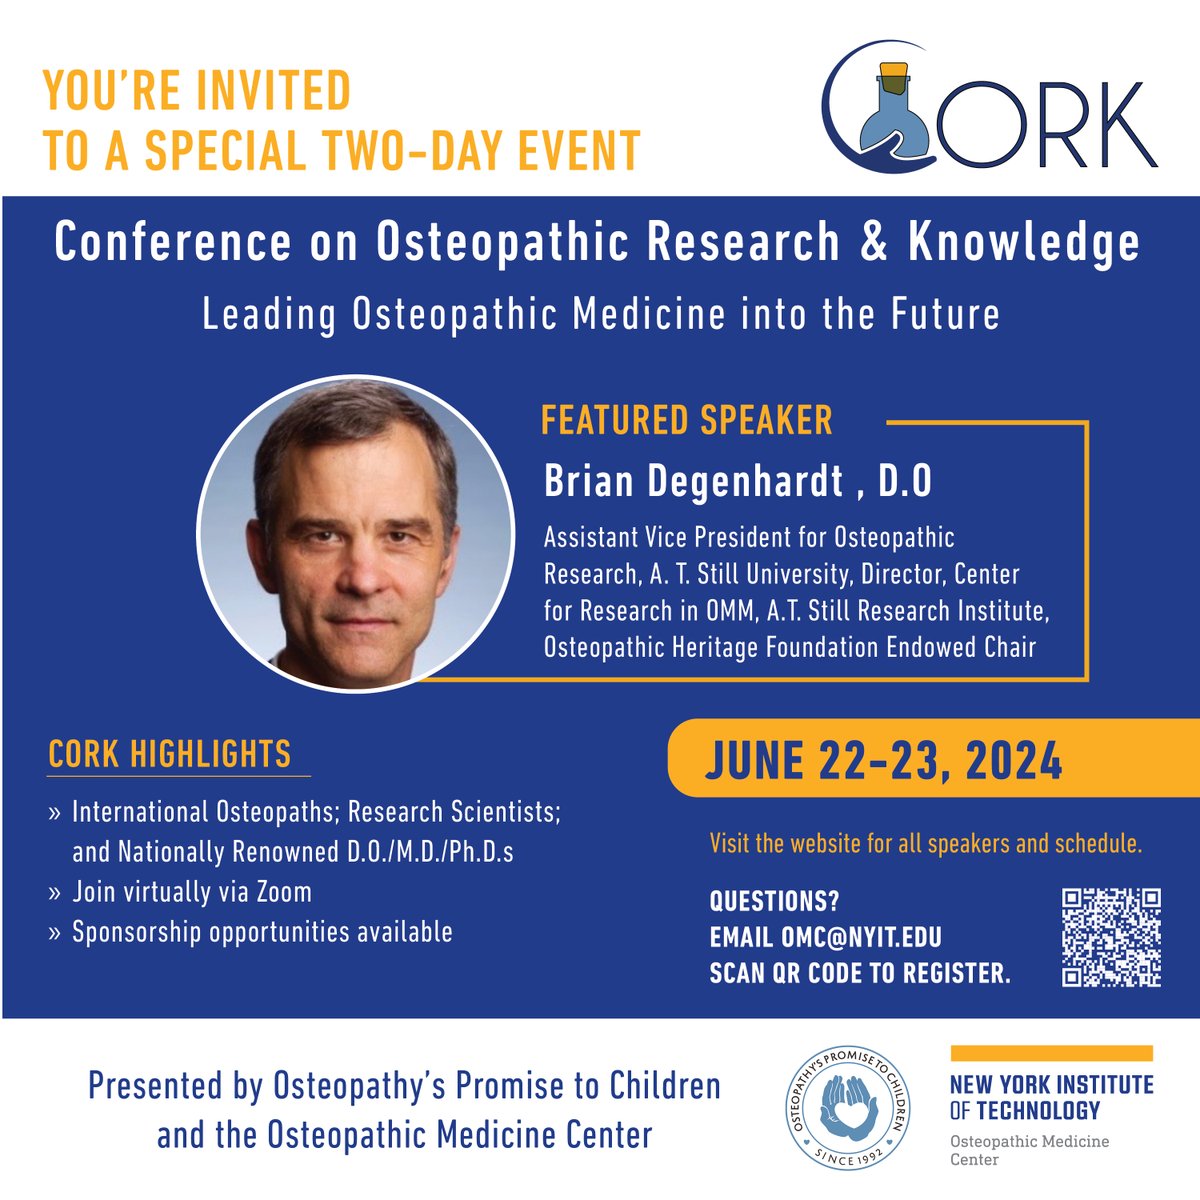 Join us for #CORK2024, a Two-Day Conference on Osteopathic Research and Knowledge! 📅 June 22-23, 2024 📍 NYIT College of Osteopathic Medicine 🌐 RSVP: nyit.edu/u/tZE9Q0 Follow @corkconference on Instagram. Questions? Email OMC@nyit.edu. @nyitomm @AOAforDOs